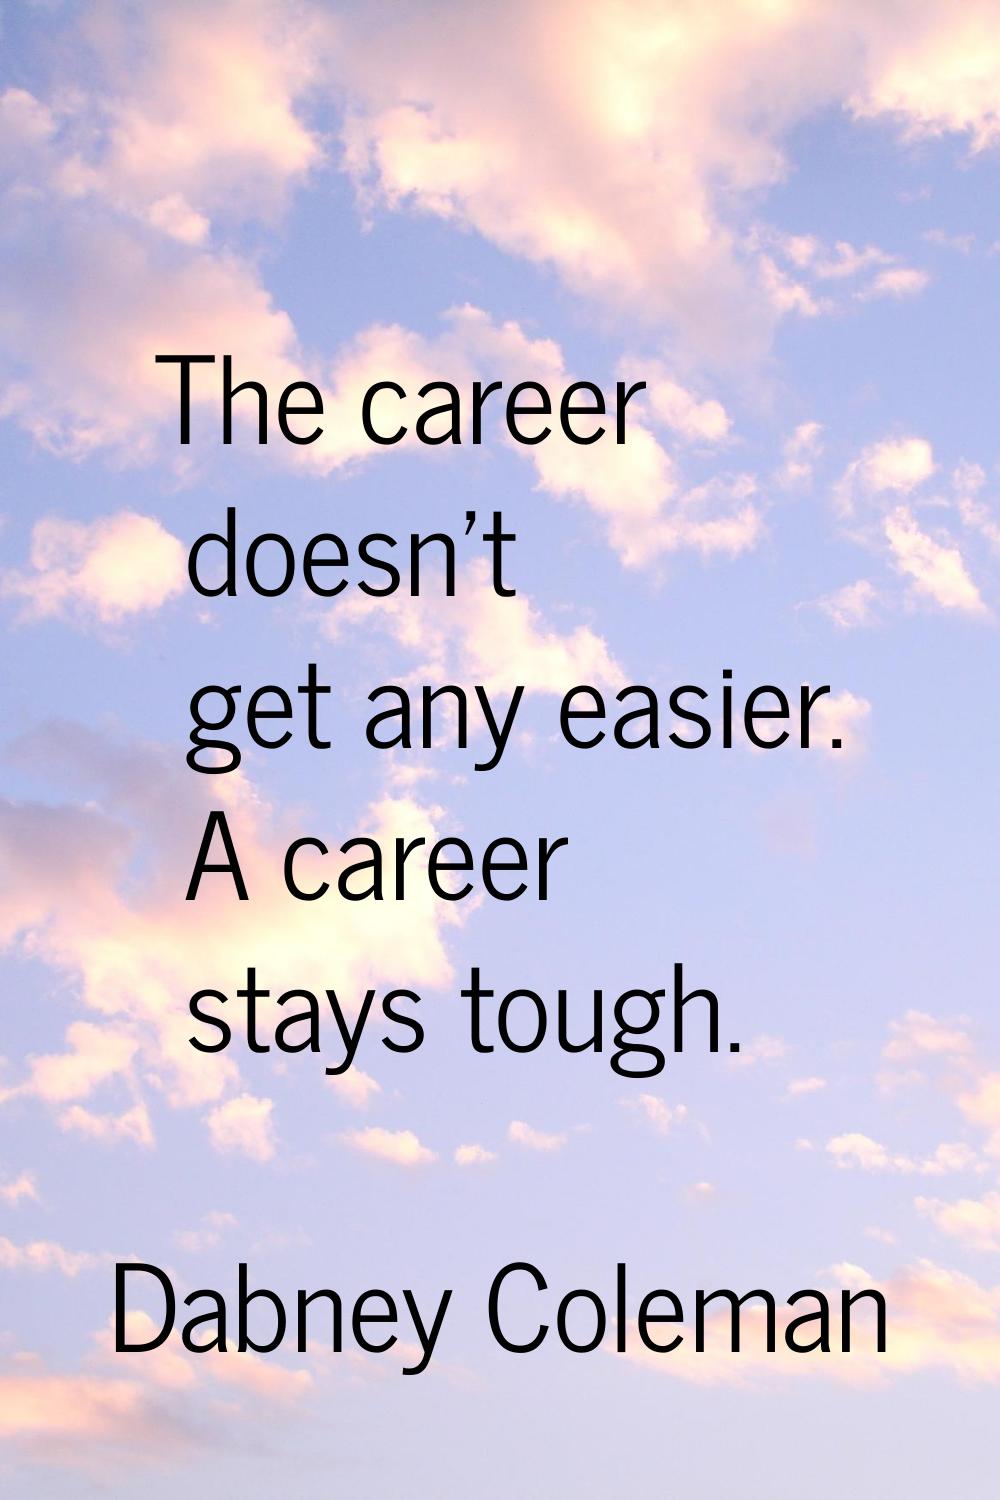 The career doesn't get any easier. A career stays tough.